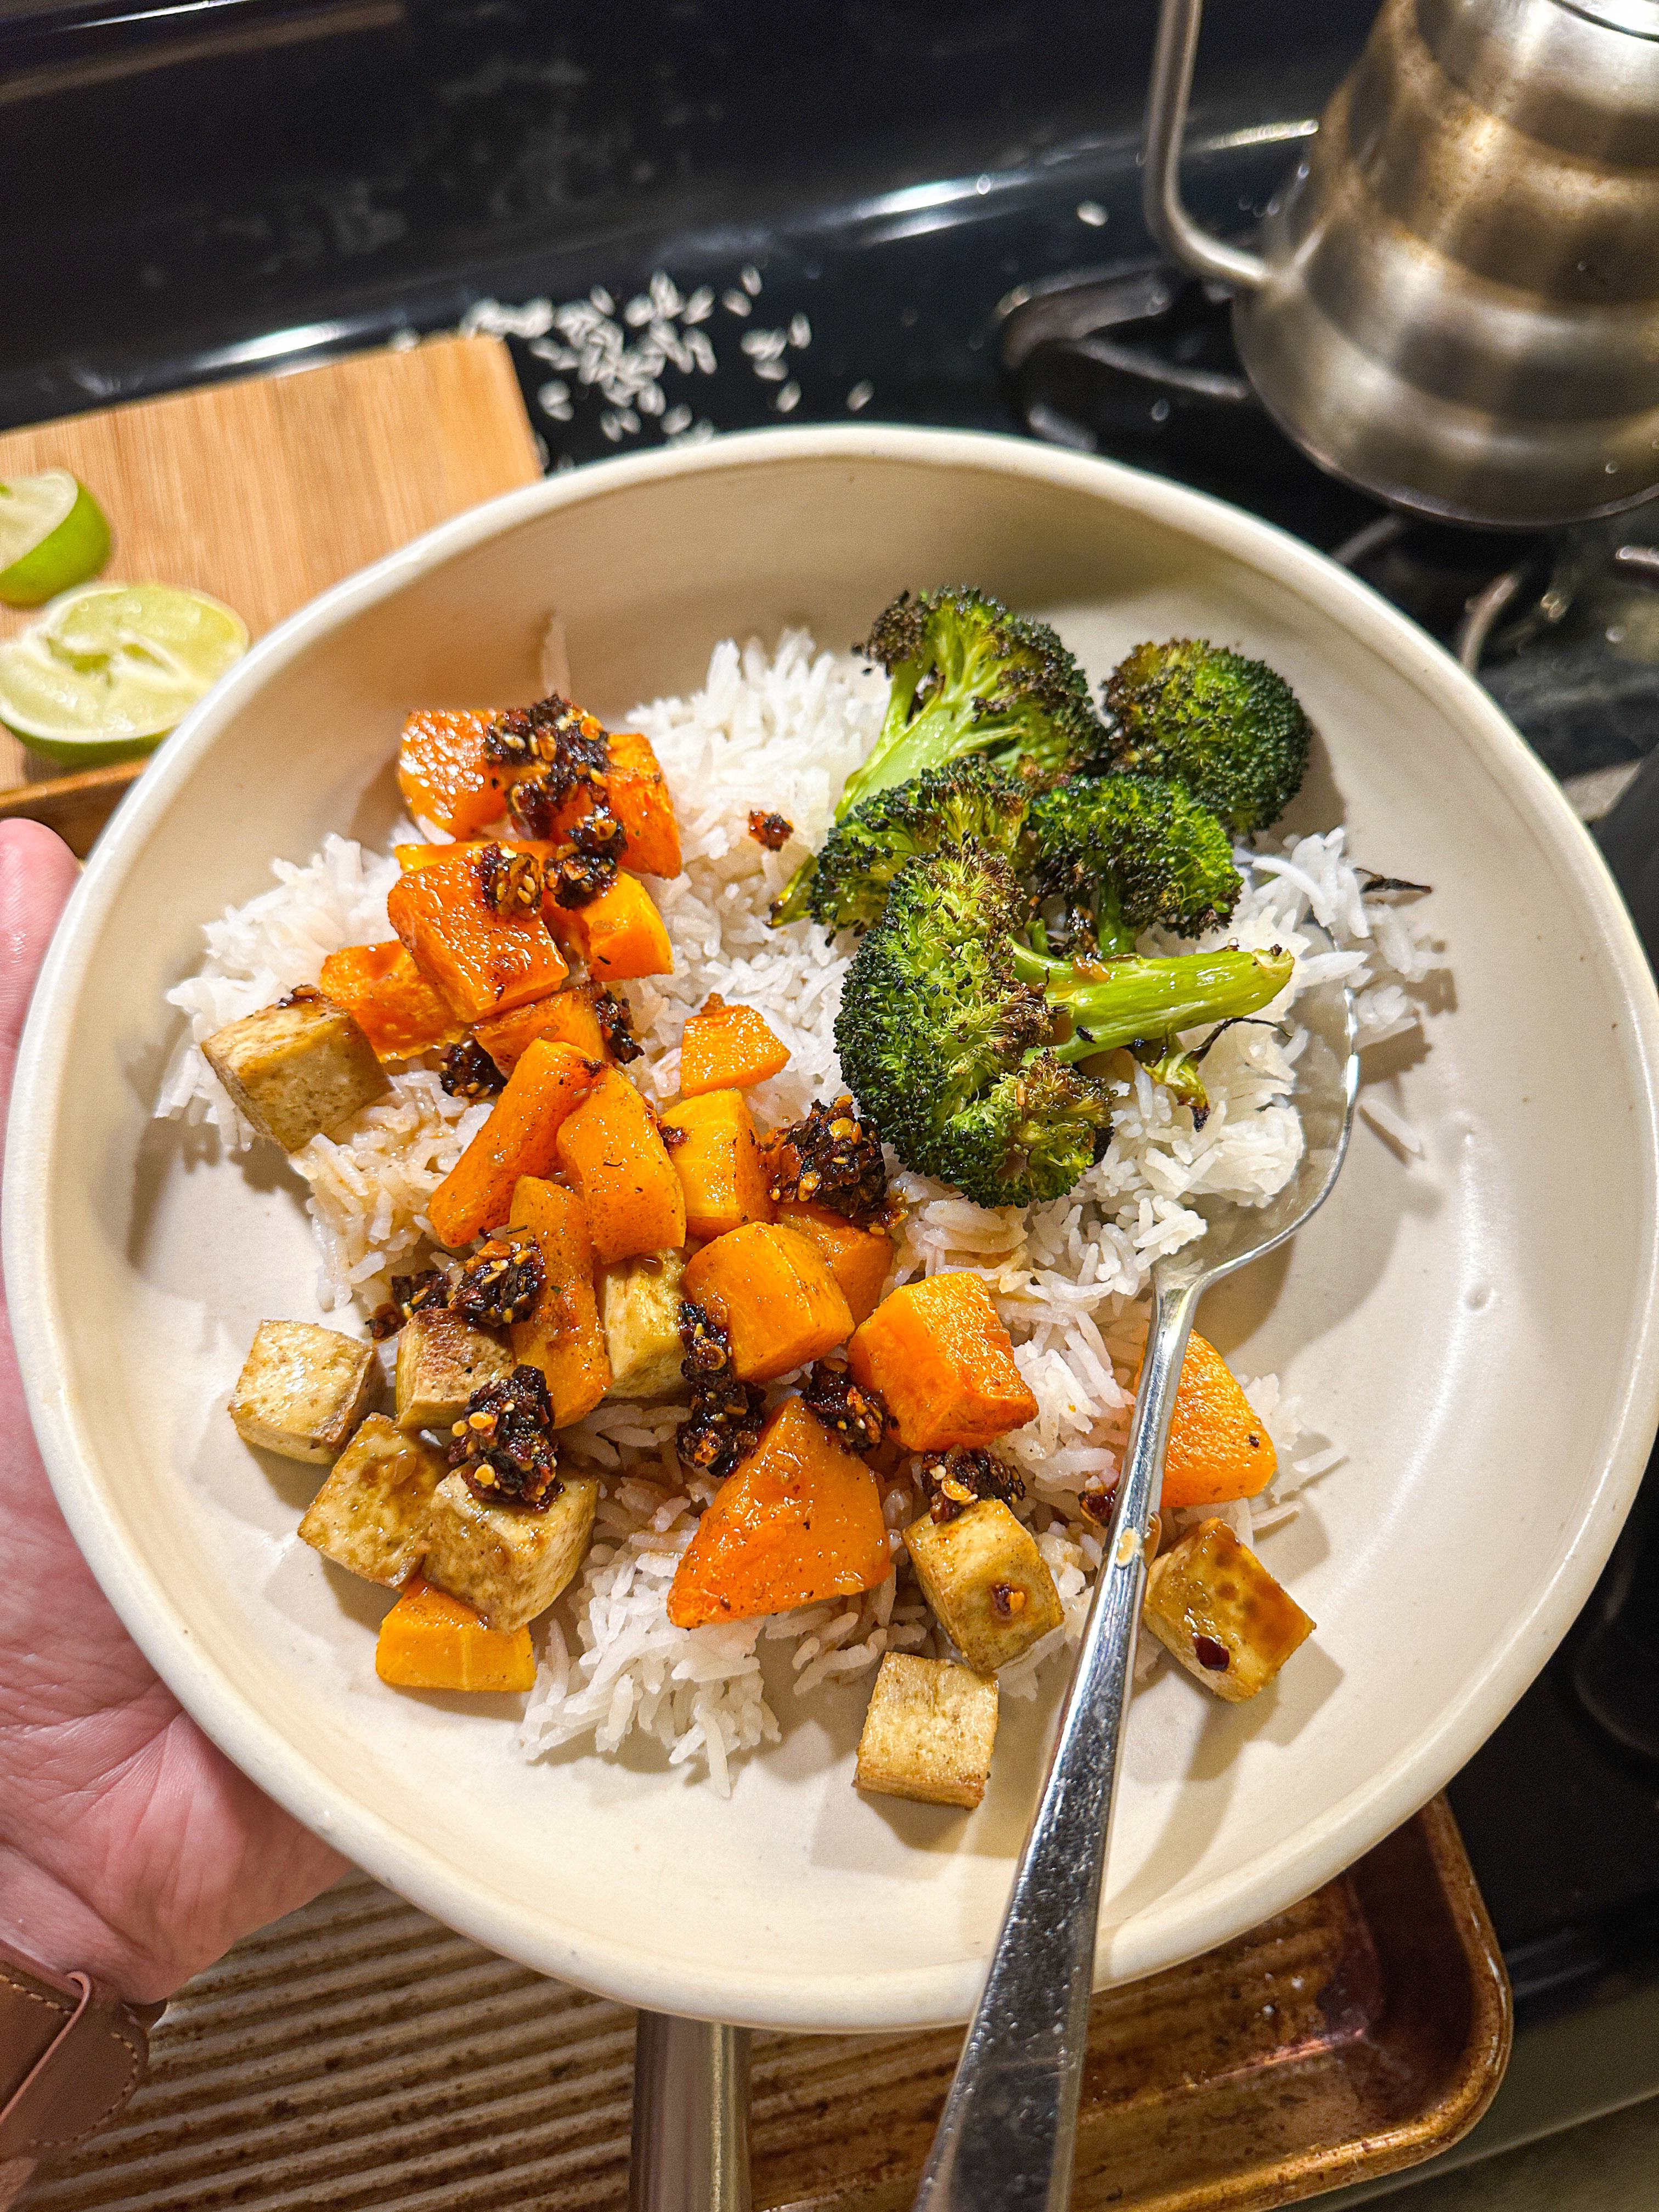 A hand holds a bowl of rice with roasted broccoli, carrots, and tofu cubes, garnished with seeds and lime wedge